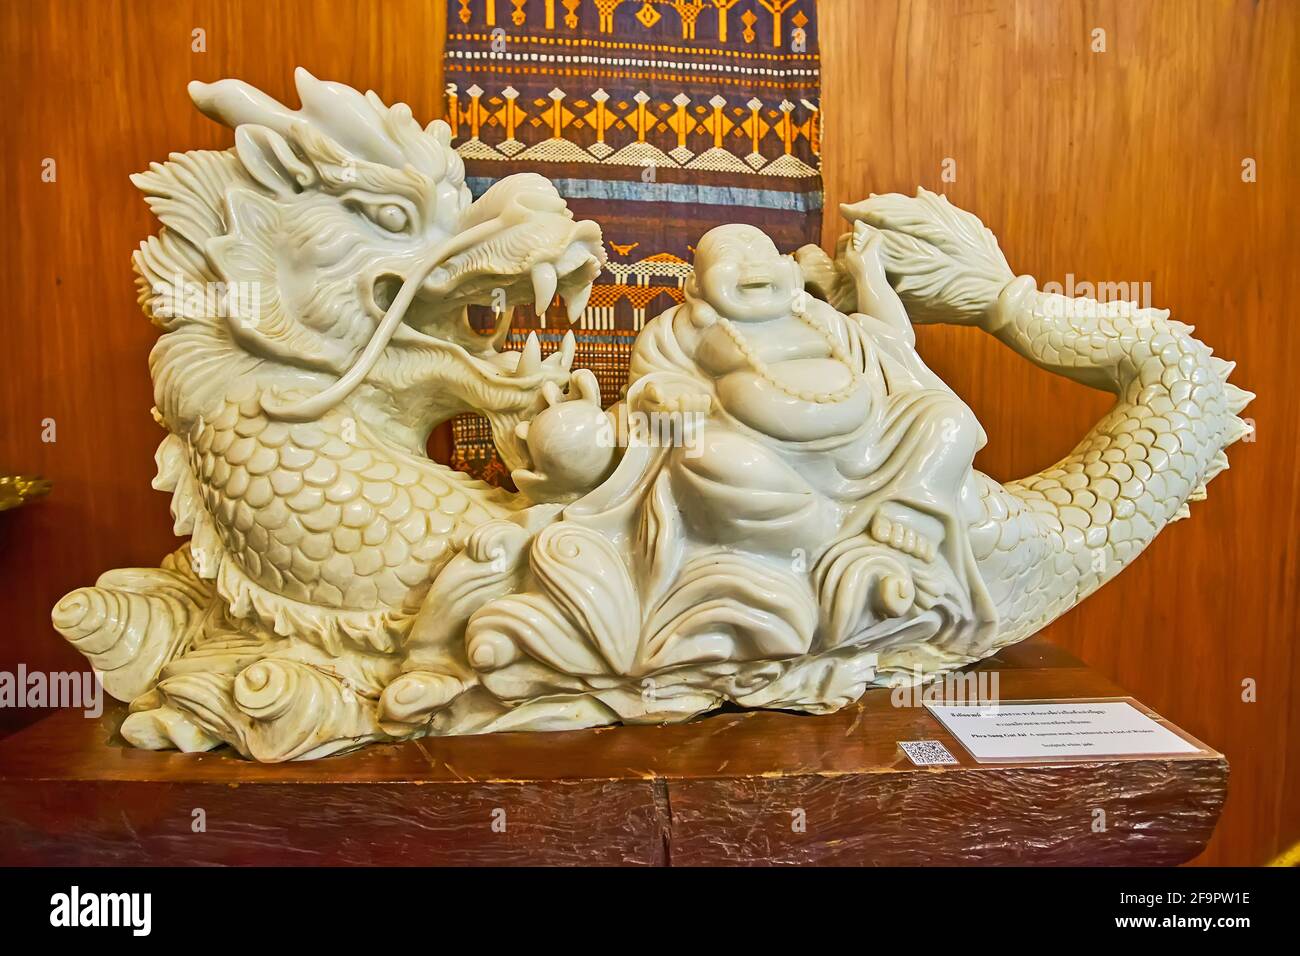 CHIANG RAI, THAILAND - MAY 11, 2019: The white jade sculpture of the God of Wisdom (Phra Sang Gut Jai), sitting on the dragon, Museum of Wat Phra Kaew Stock Photo